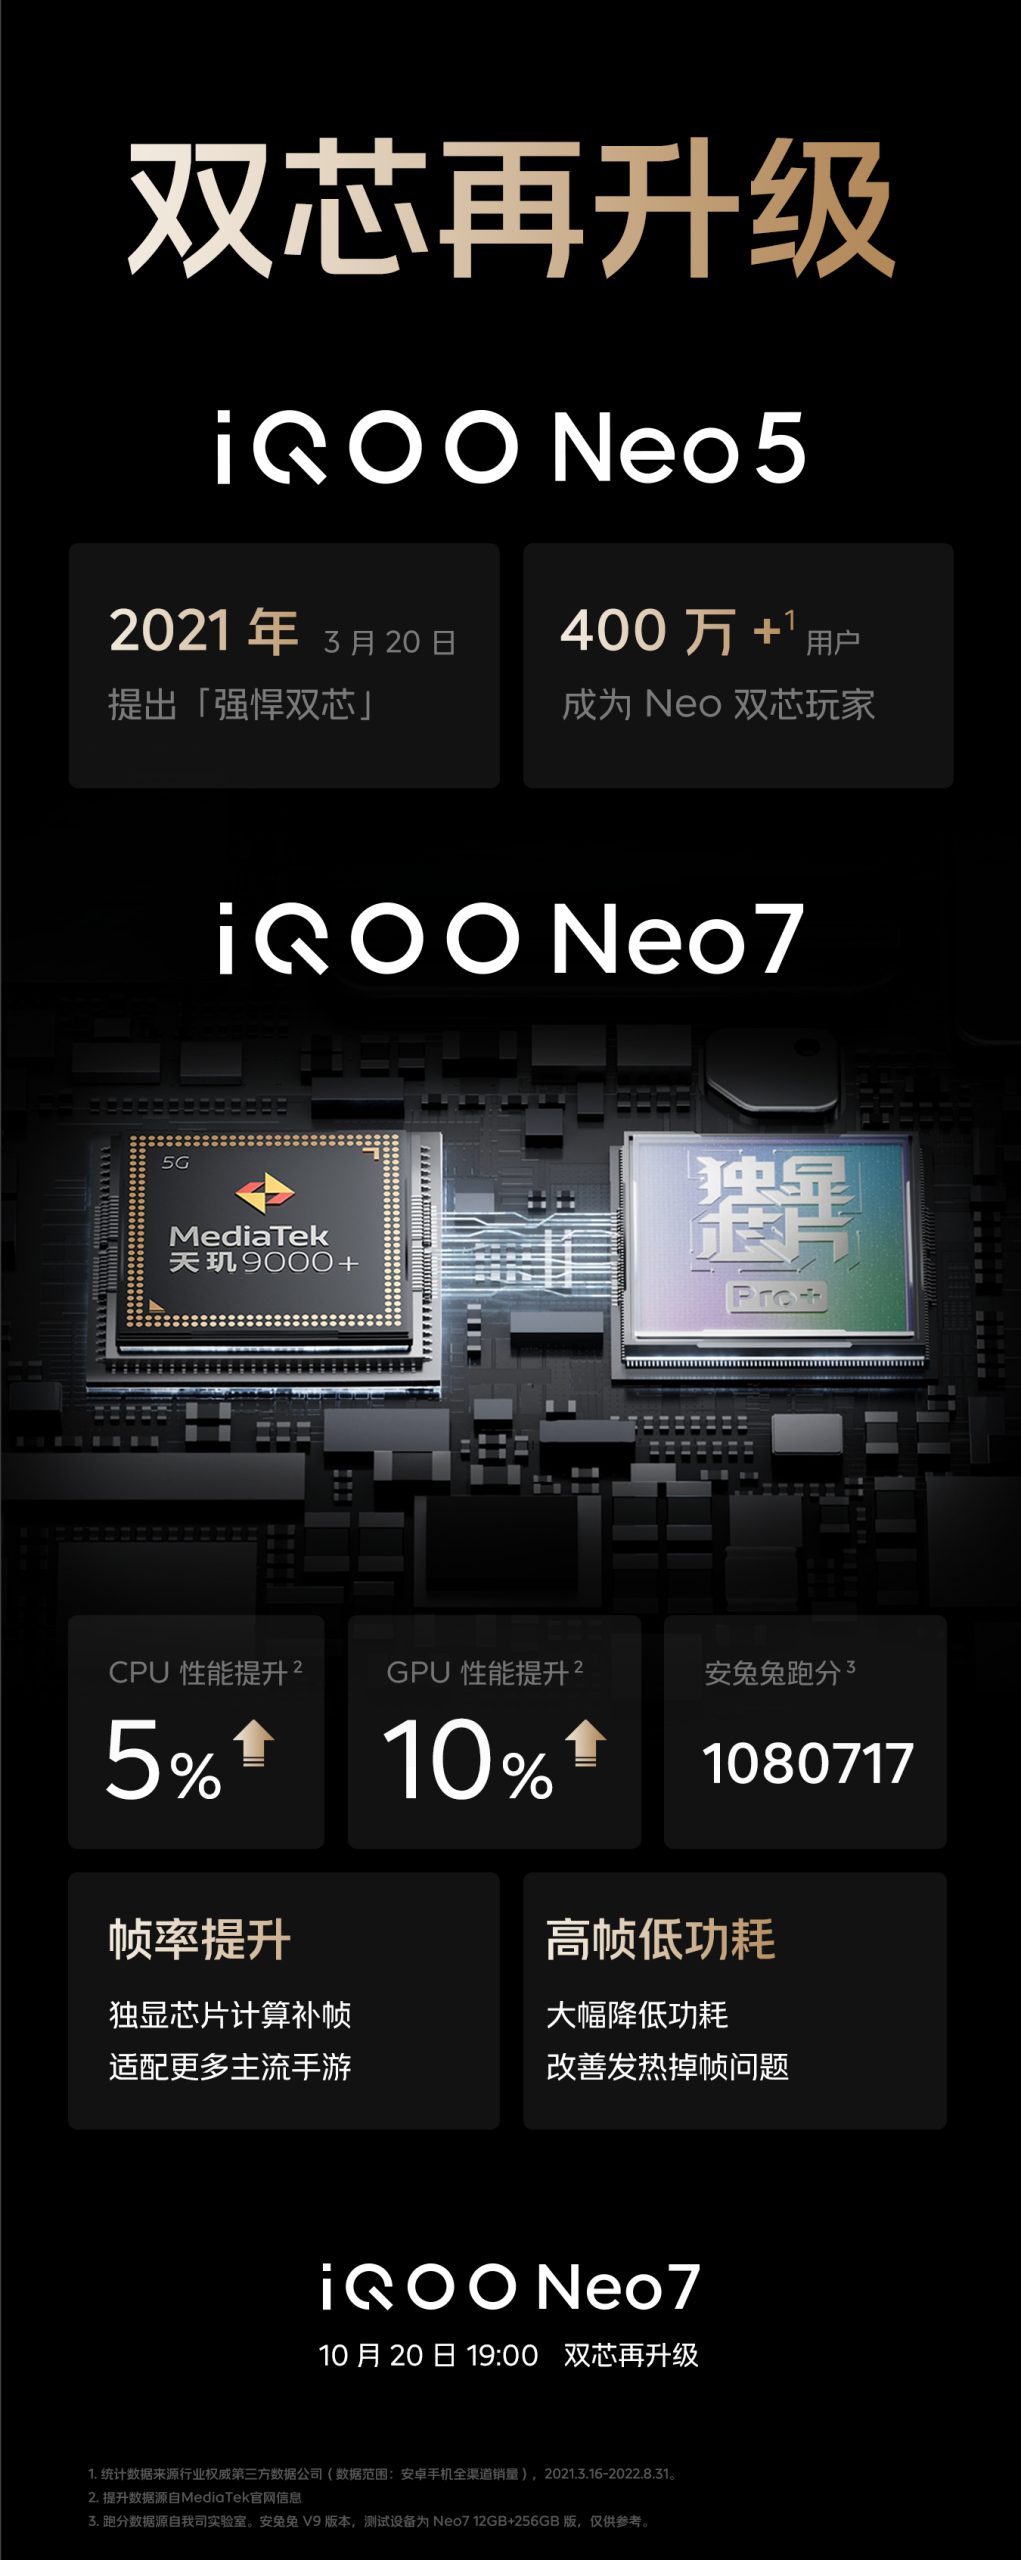 iQOO Neo7 will be Powered by Dimensity 9000+ Chipset and Independent Display Chip